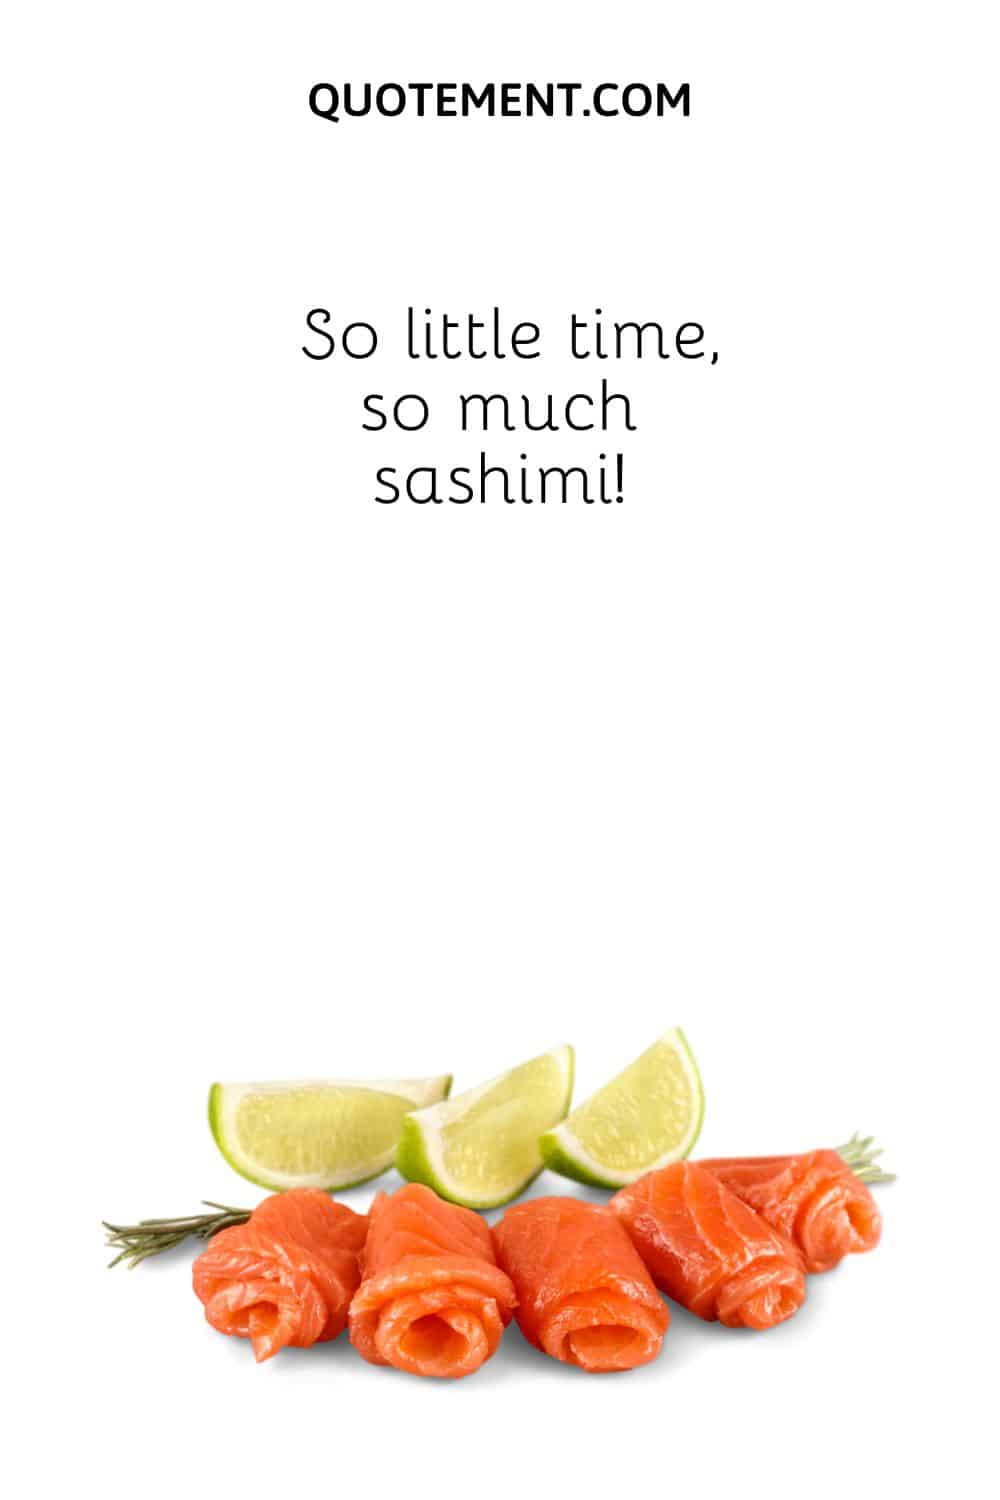 So little time, so much sashimi!